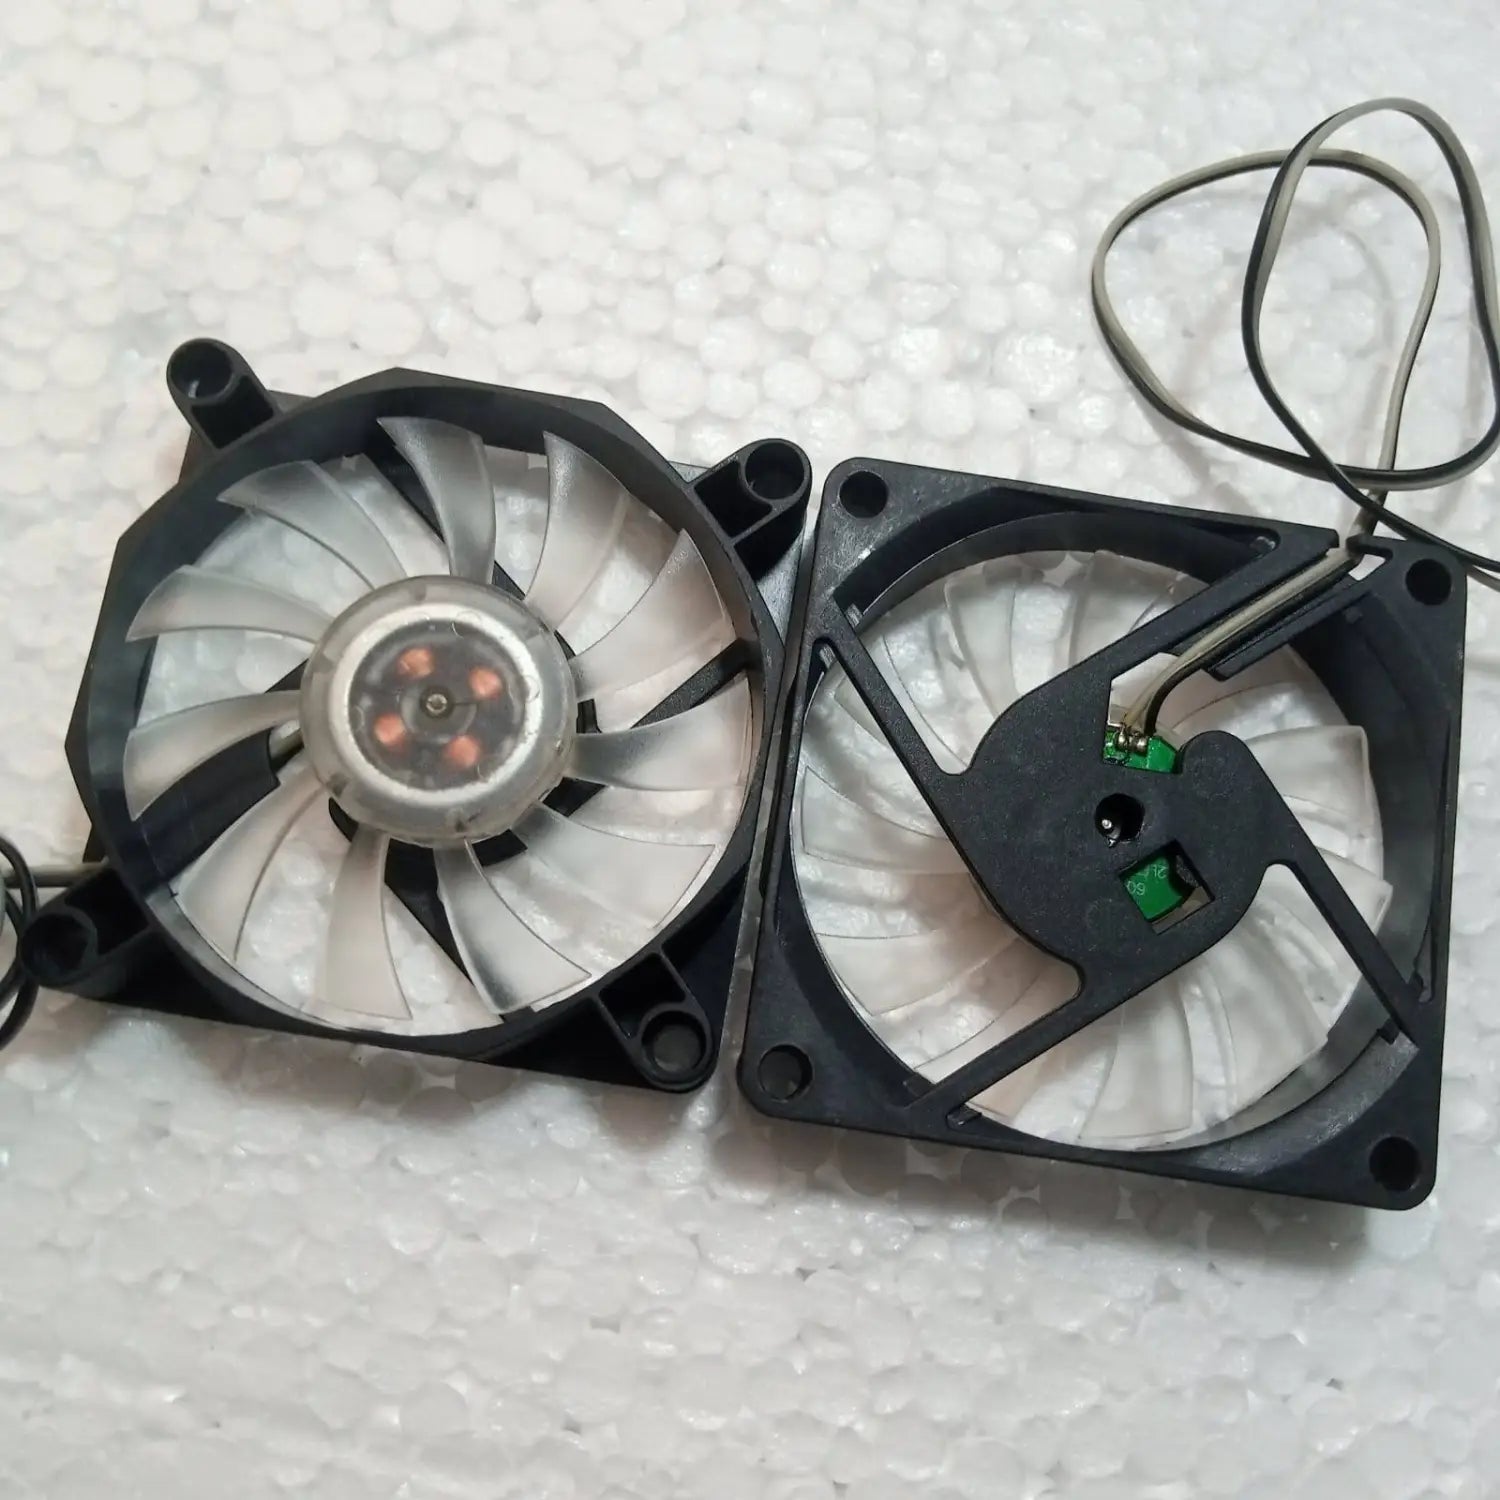 5v Laptop Cooling Pad Fan Cooler With Led In Pakistan